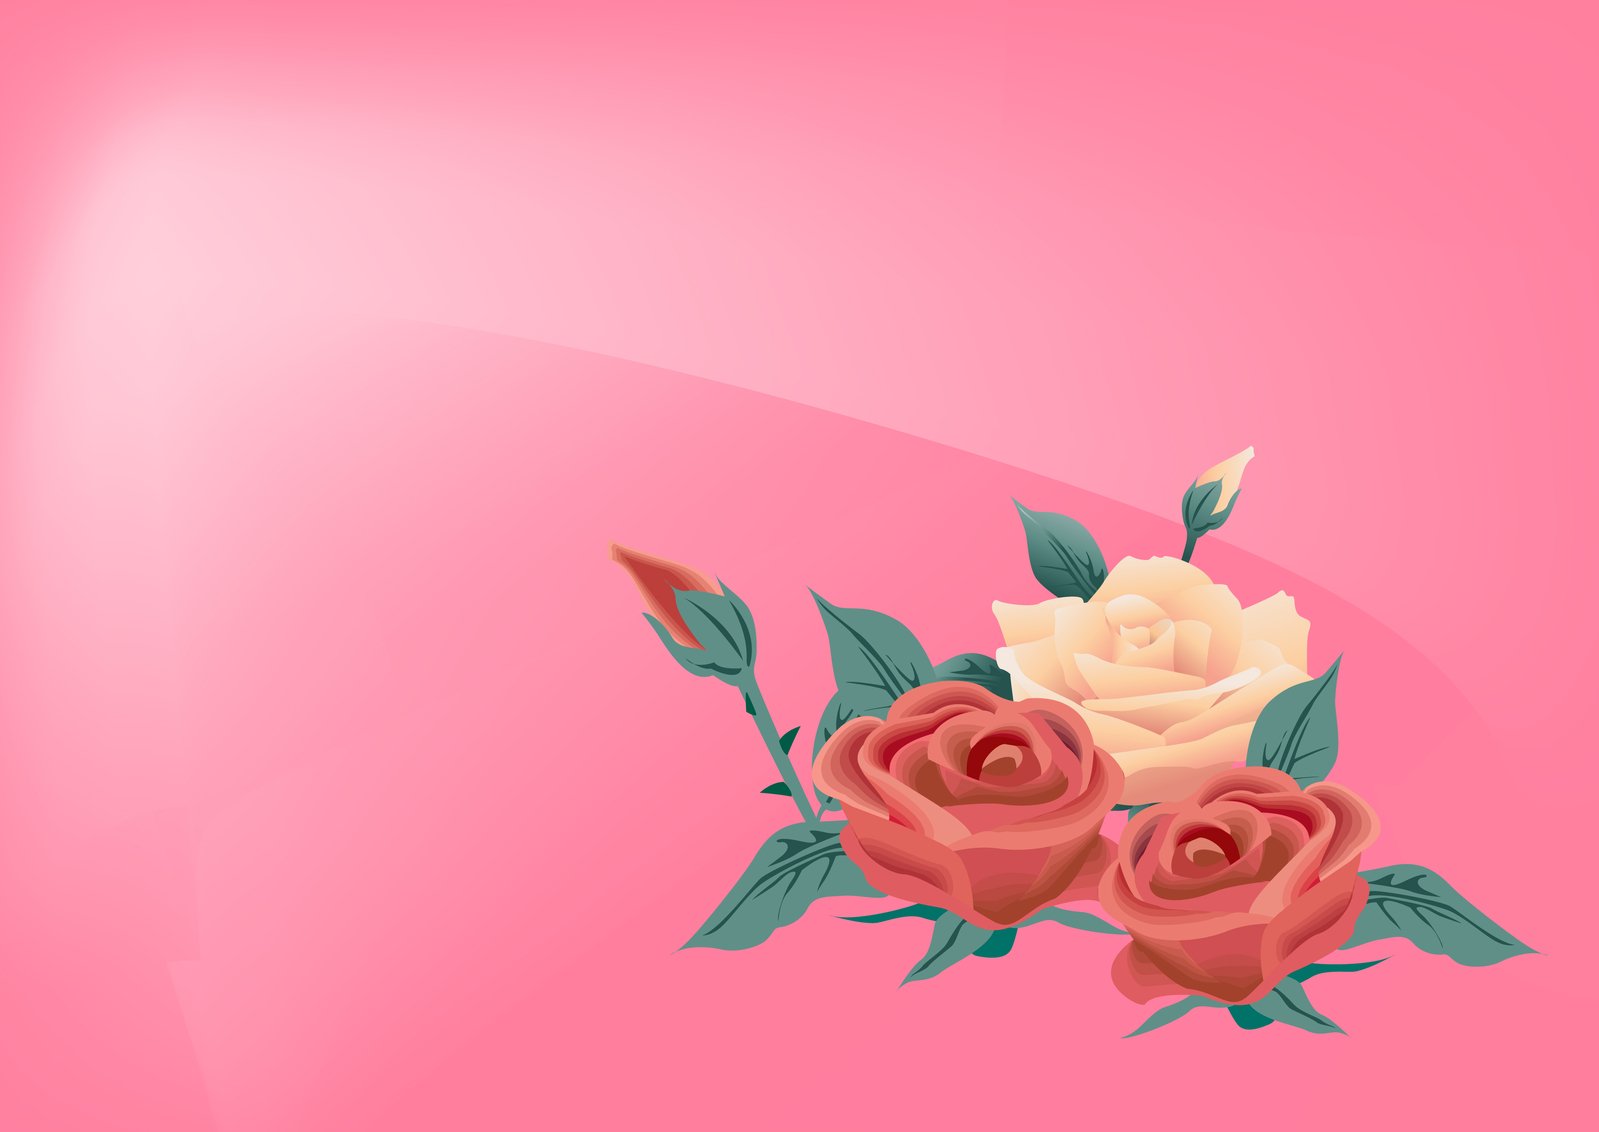 some roses on a pink background and one has leaves